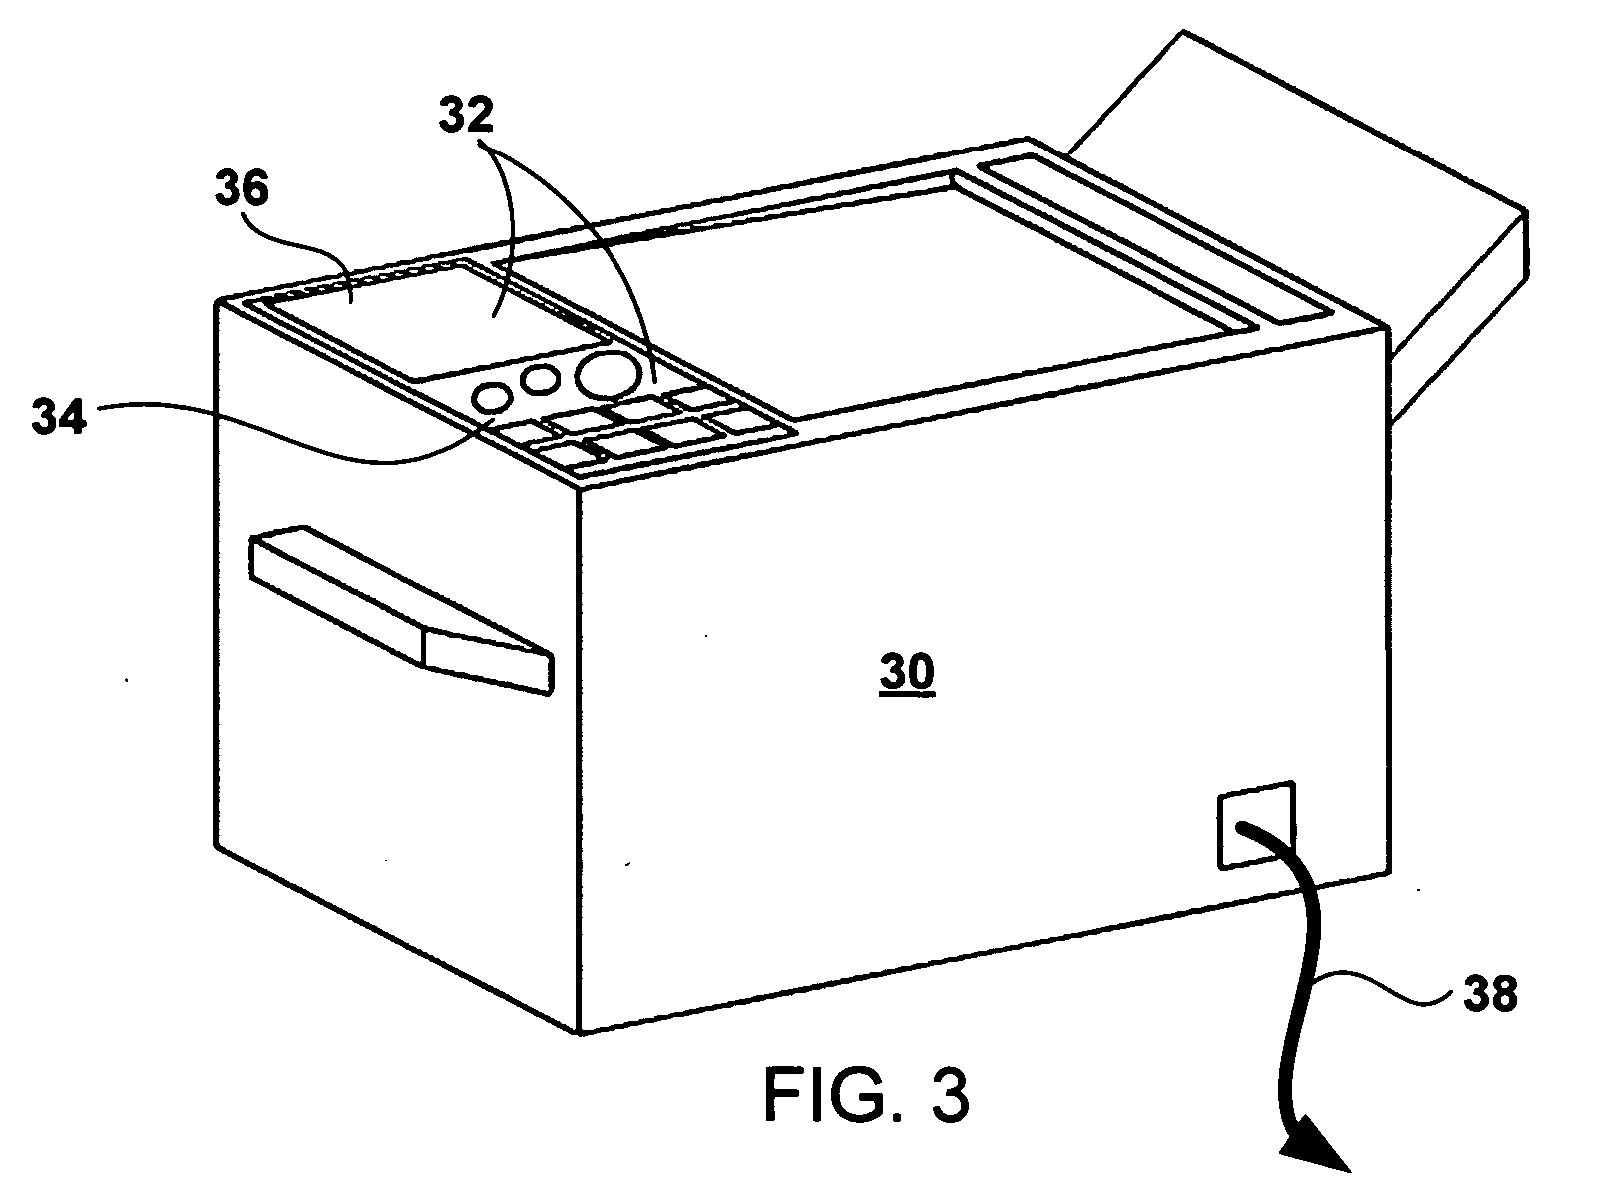 Methods and systems for receiving content at an imaging device